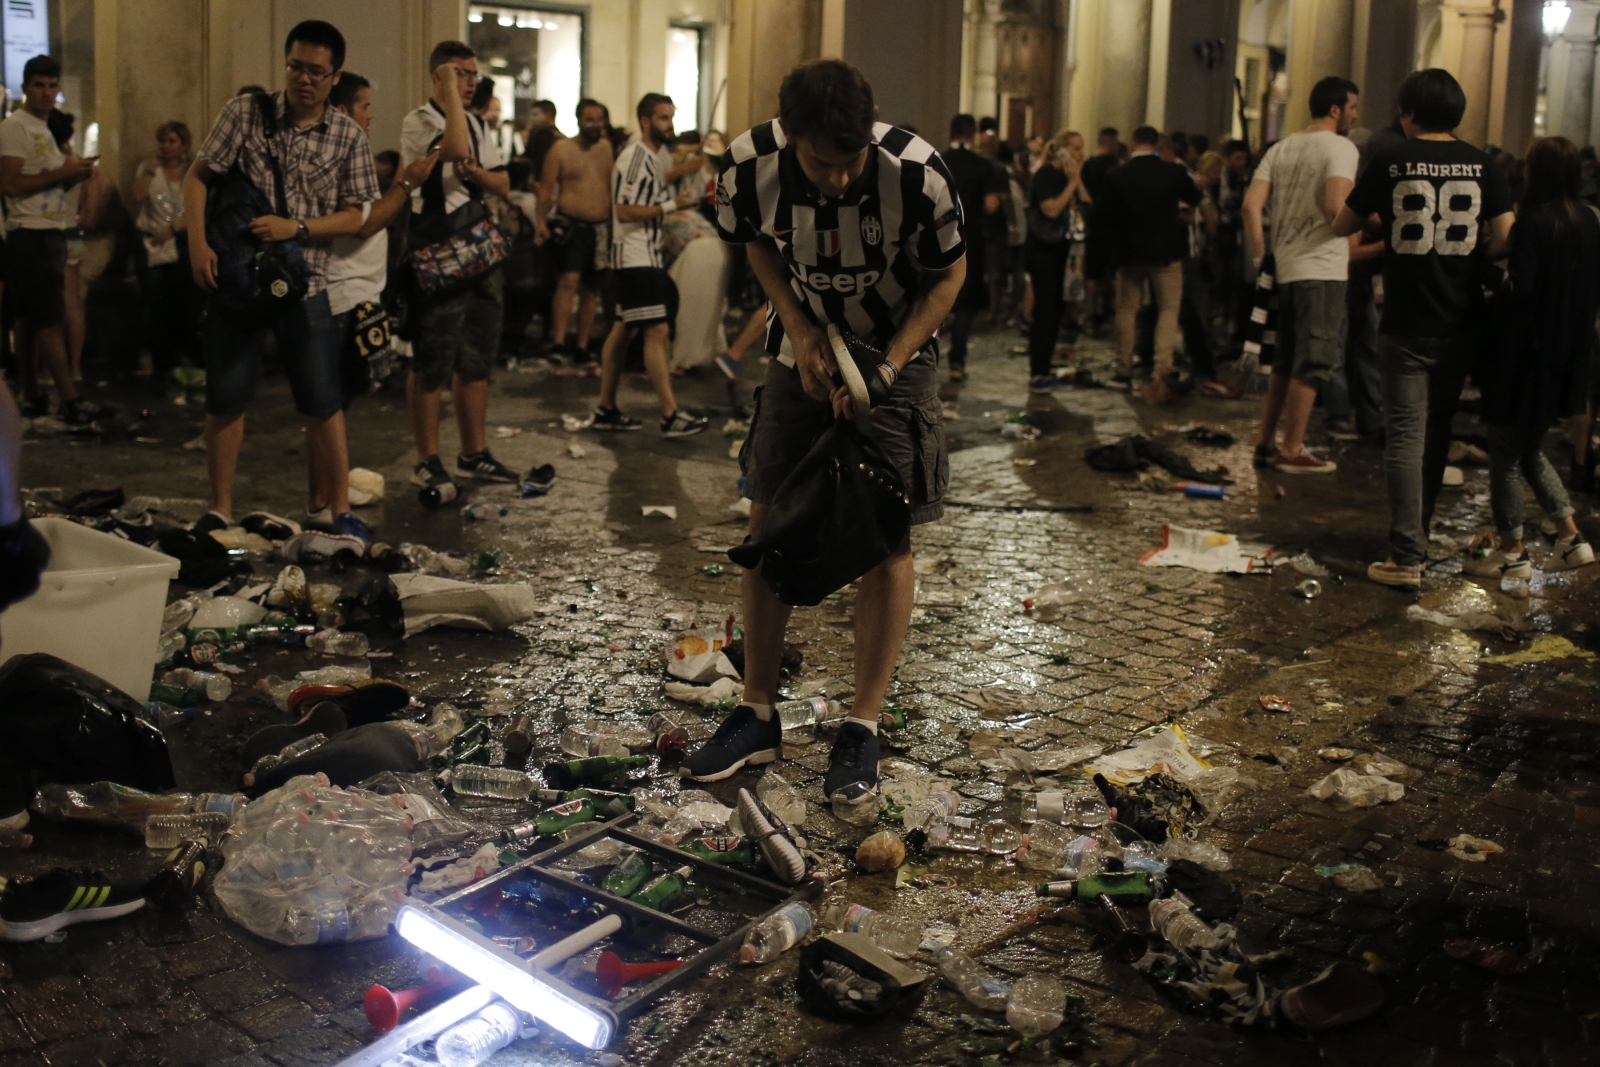 Hundreds of football fans injured during stampede in Italy's Turin after bomb scare1600 x 1067